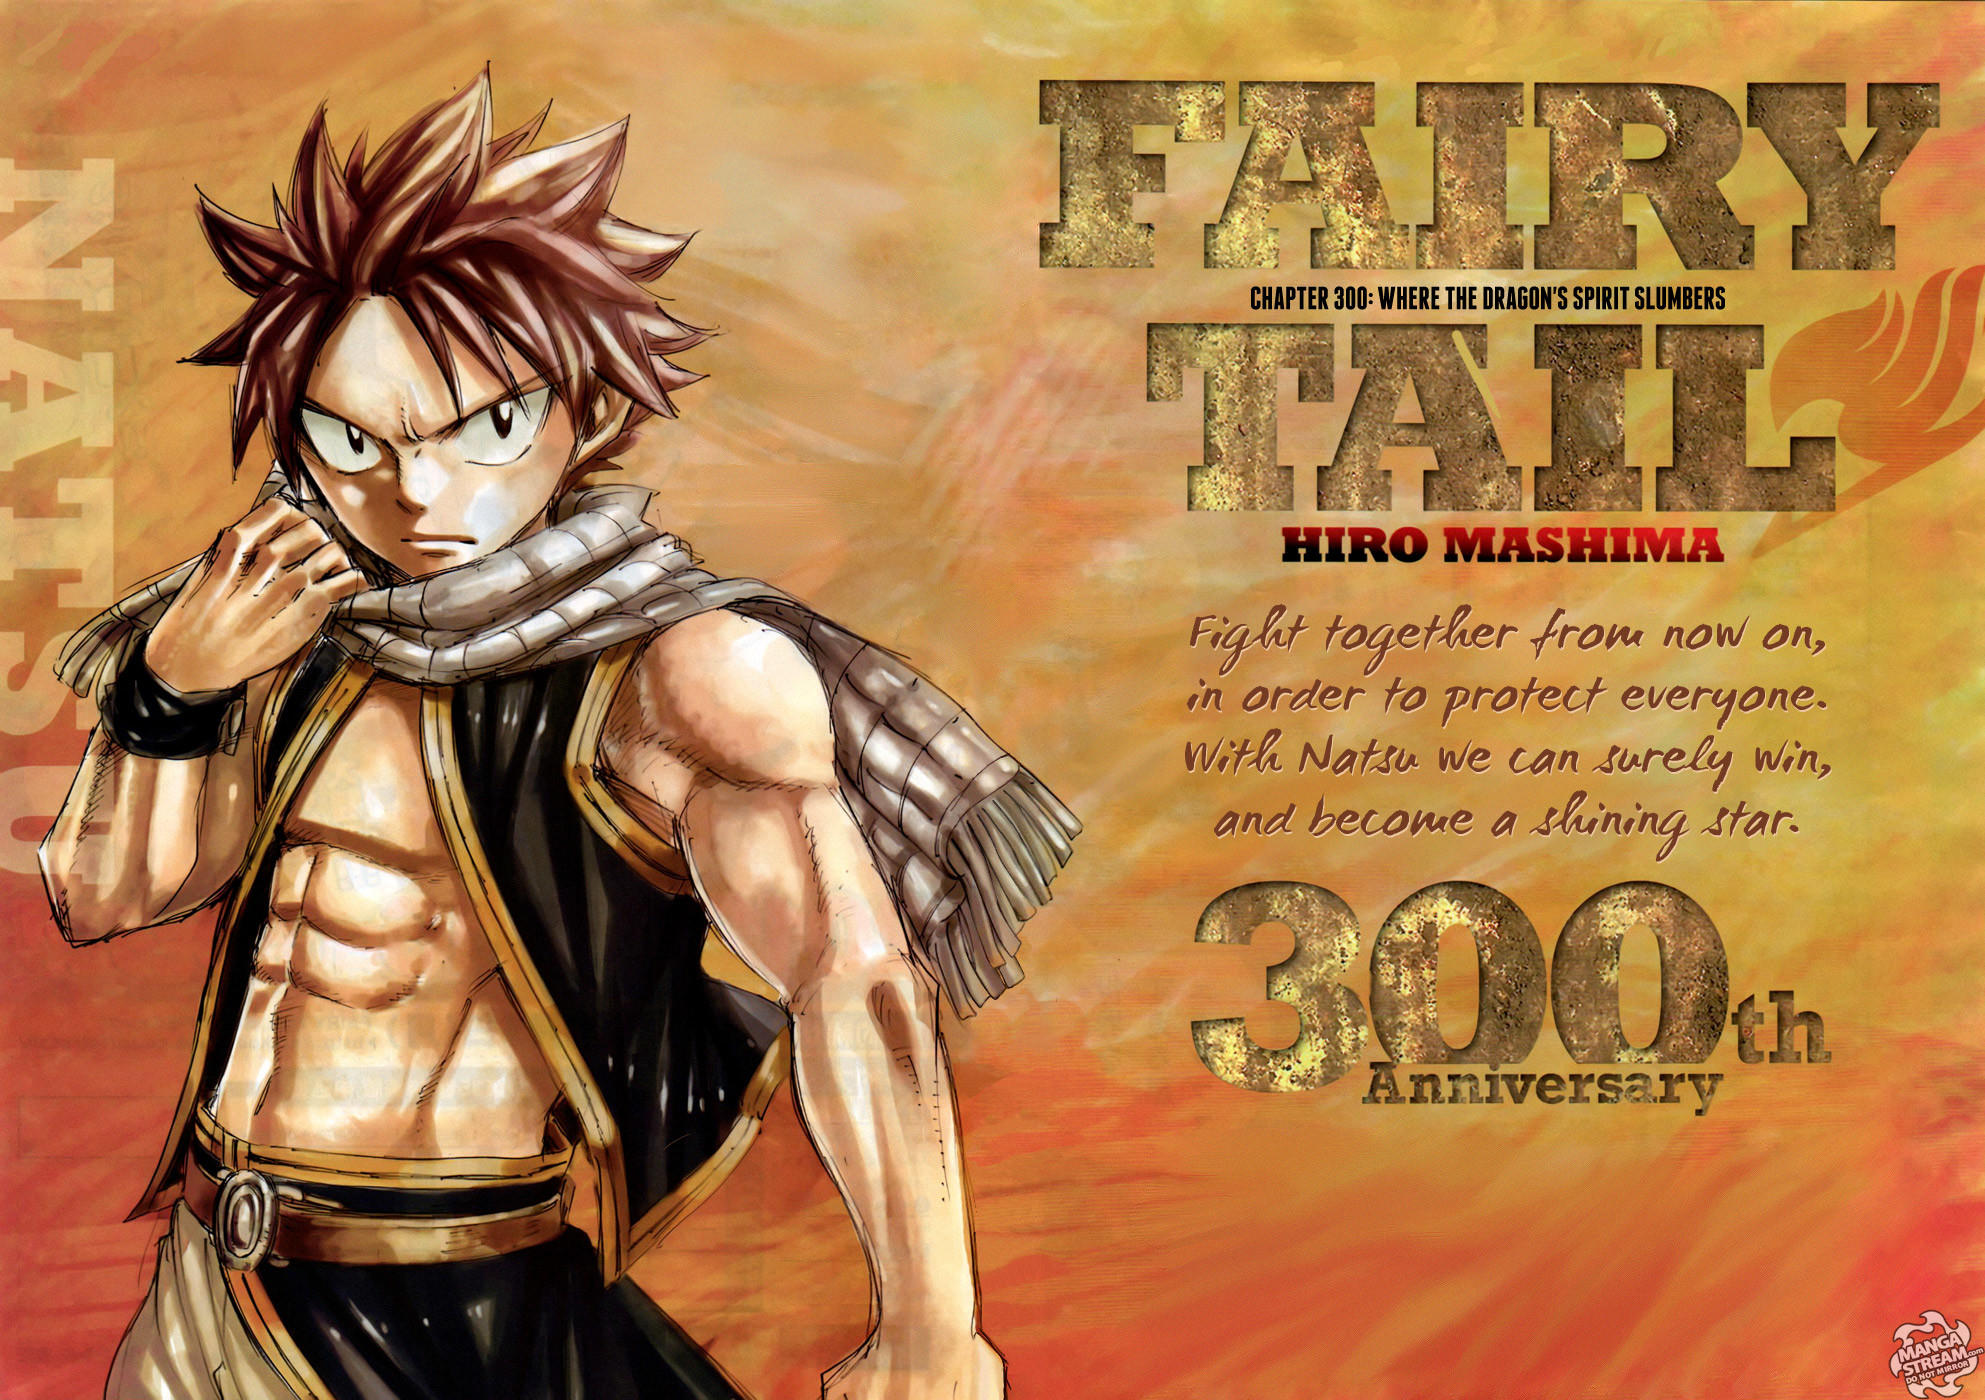 1985x1400 Fairy Tail Natsu Wallpapers Picture